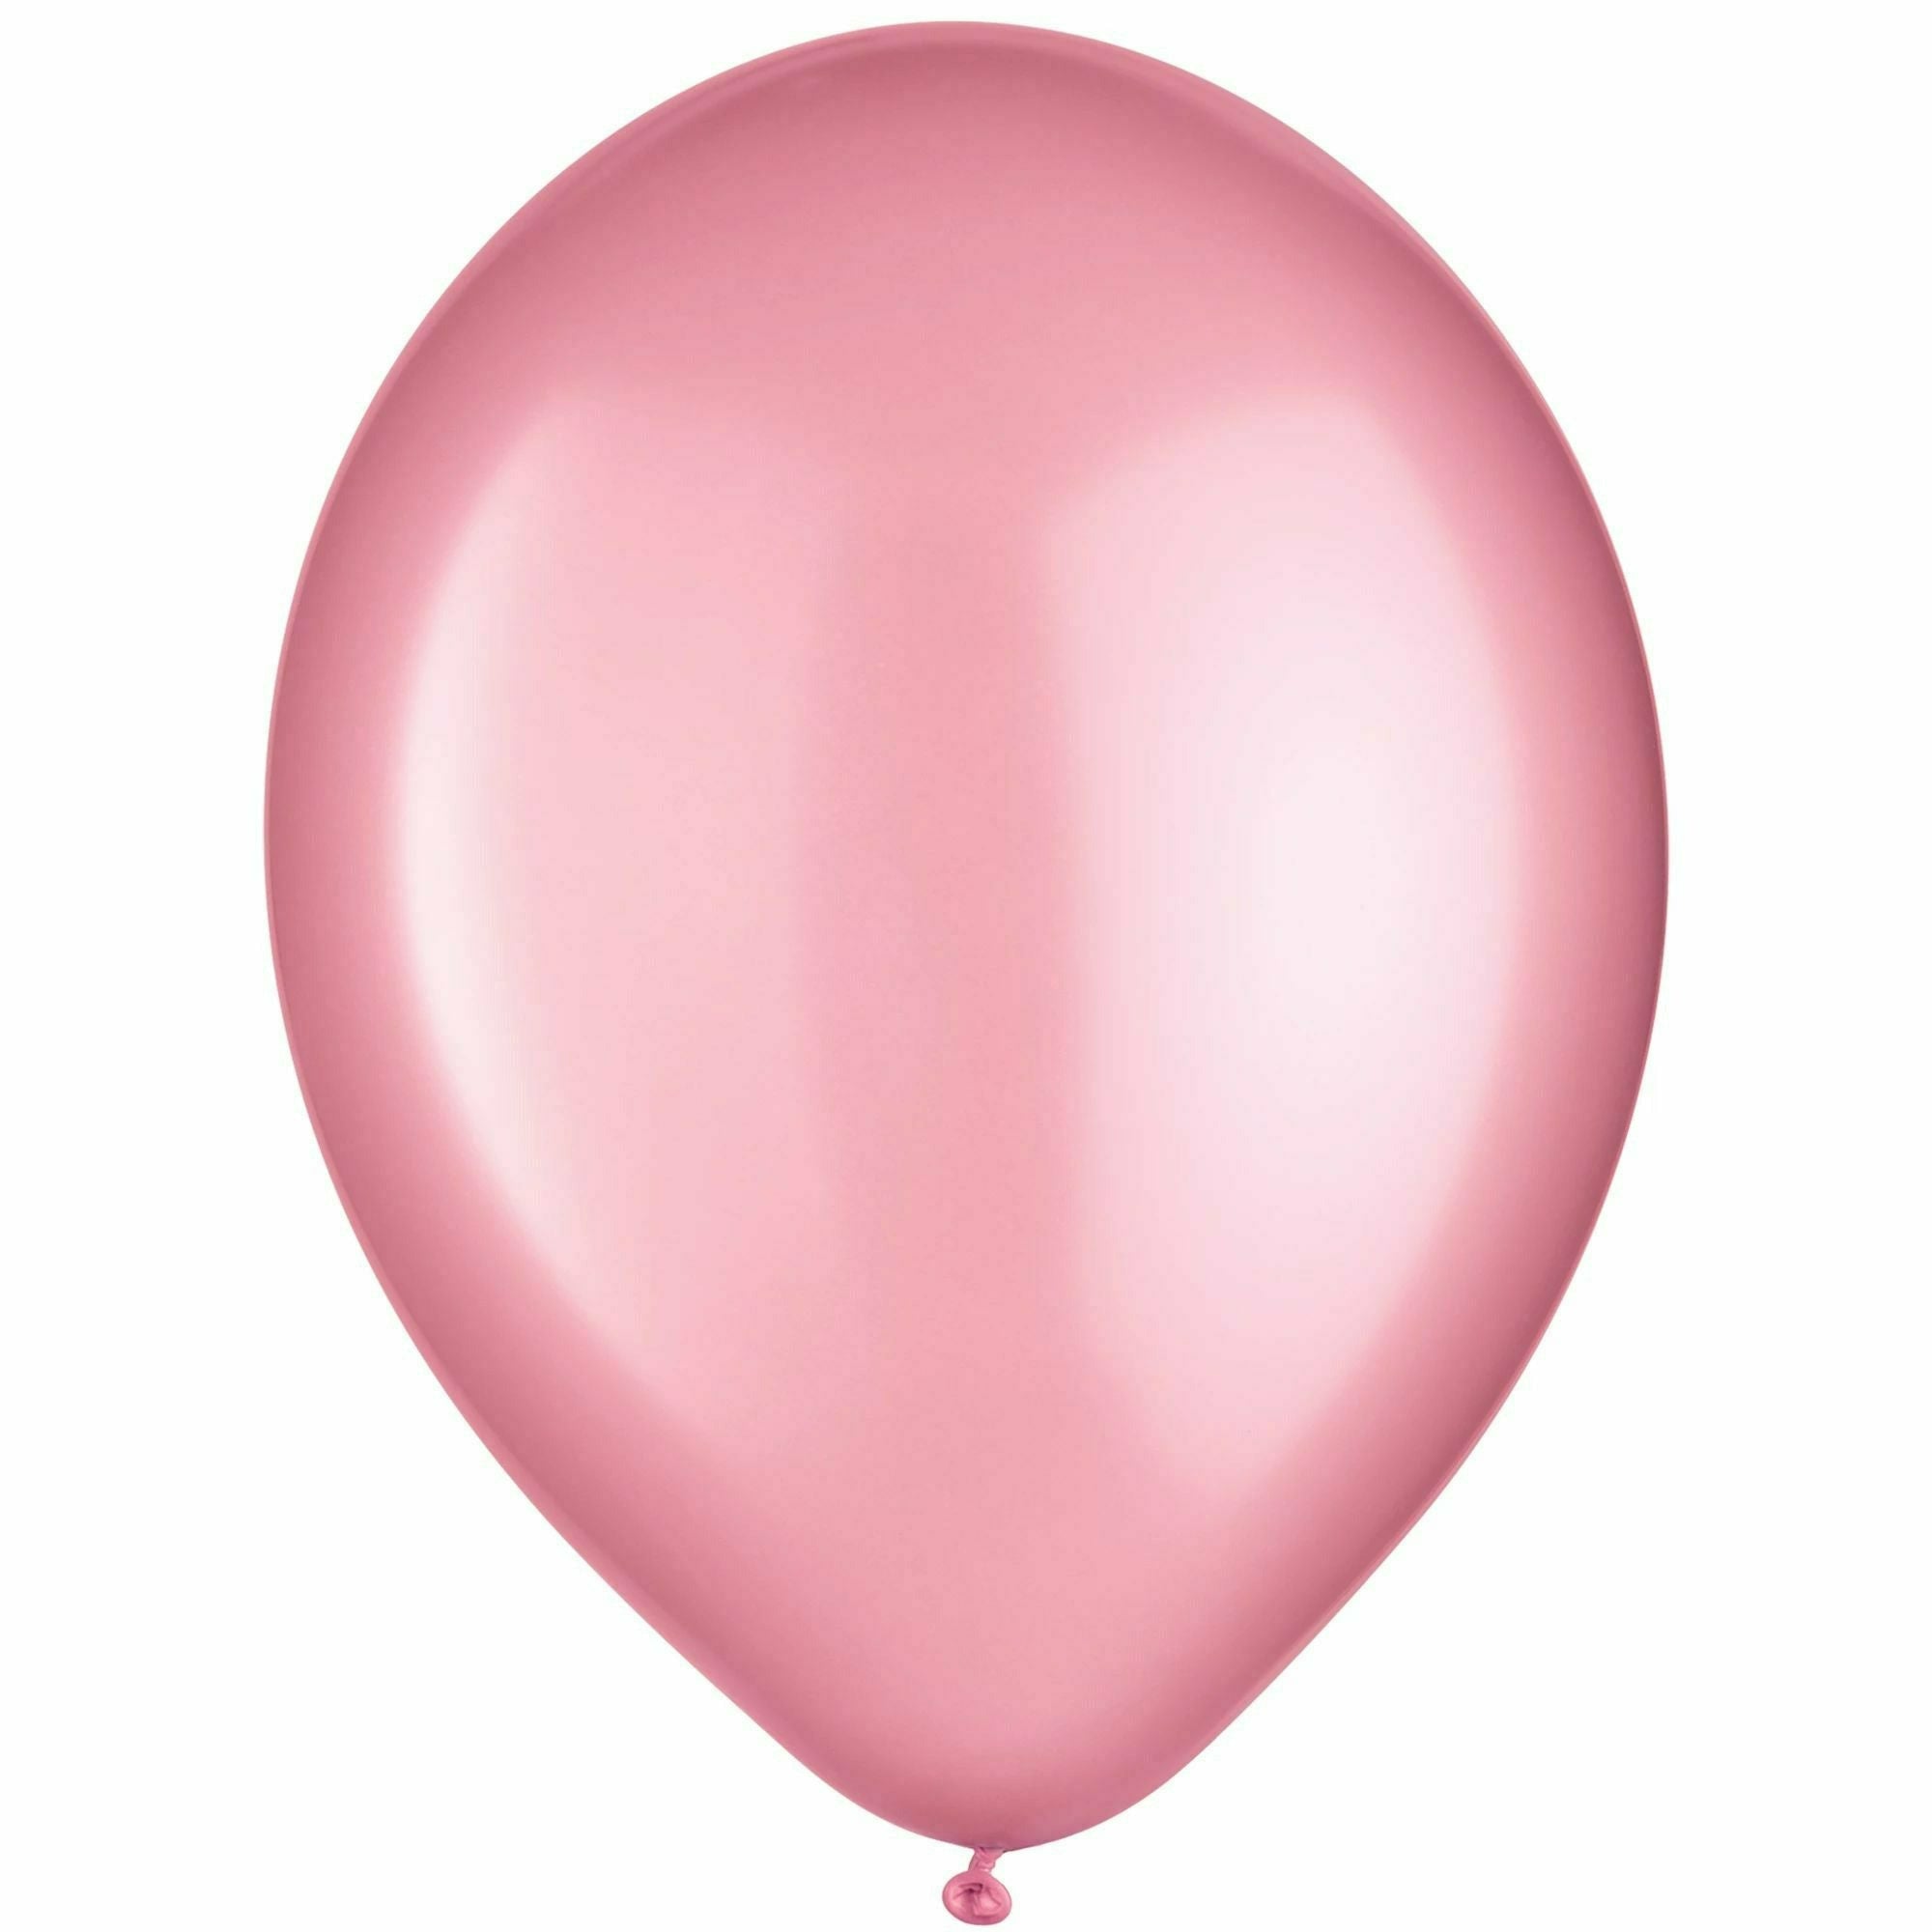 Amscan BALLOONS 12" Latex New Pink Pearlized Balloons